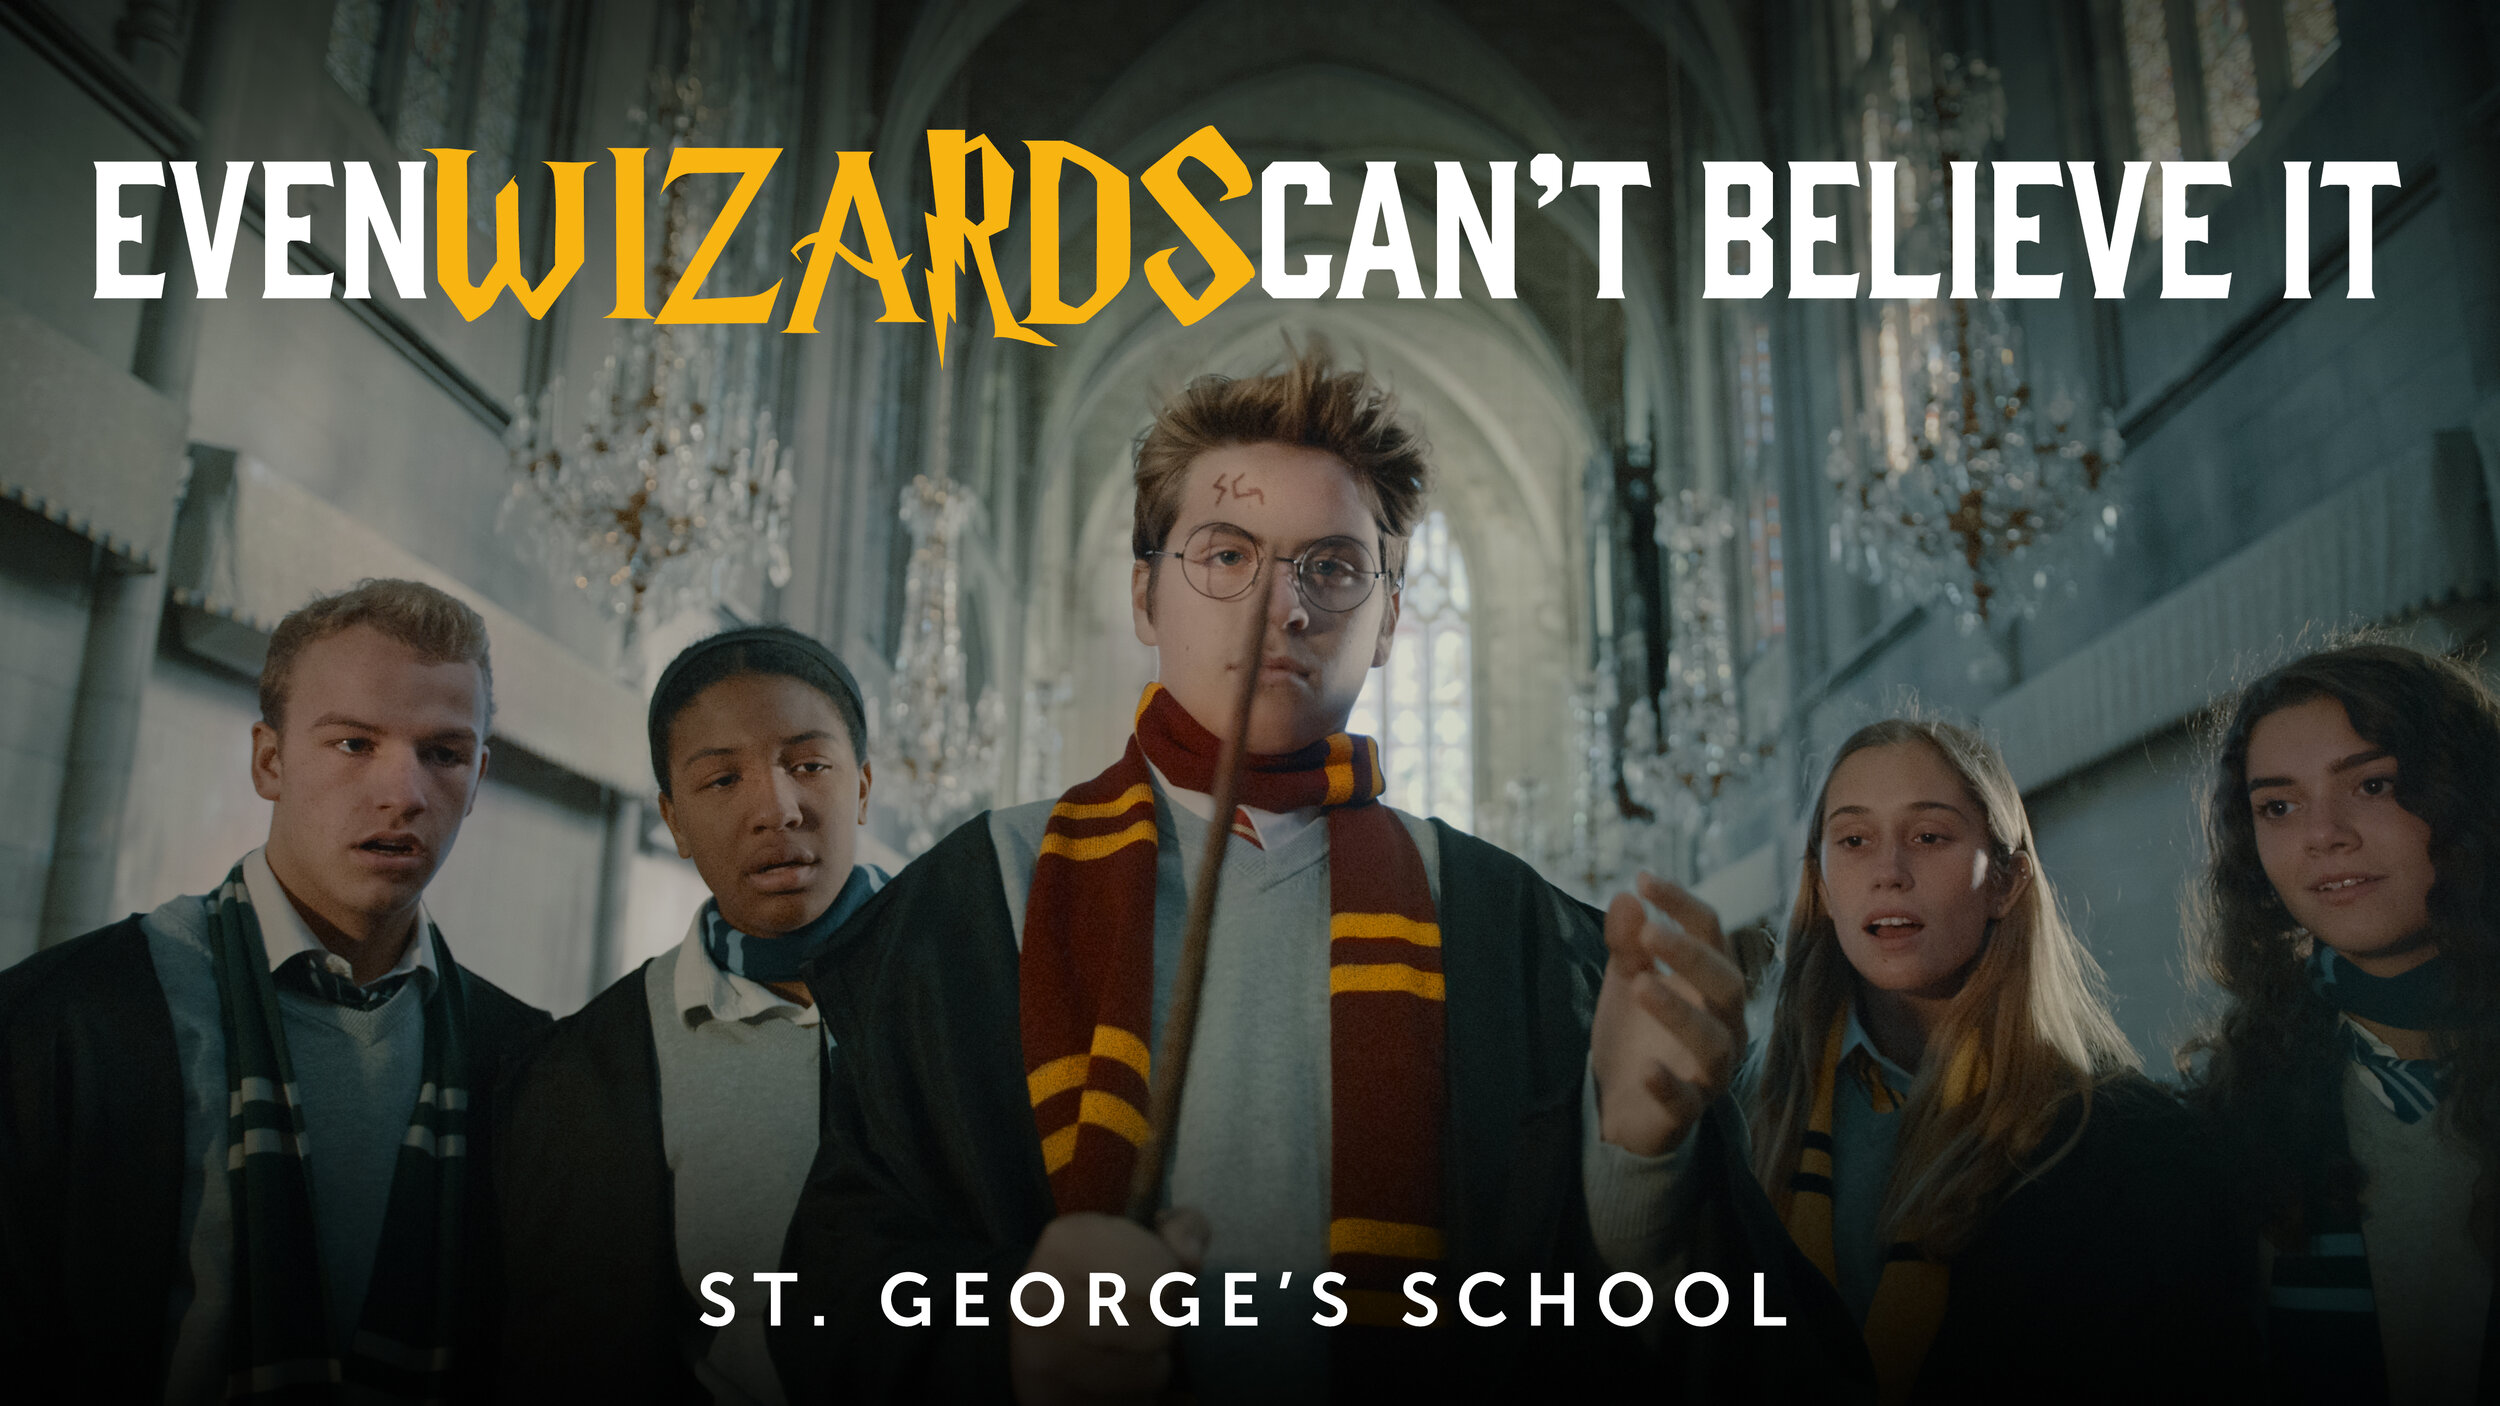 Even Wizards Can't Believe It - St. George's School